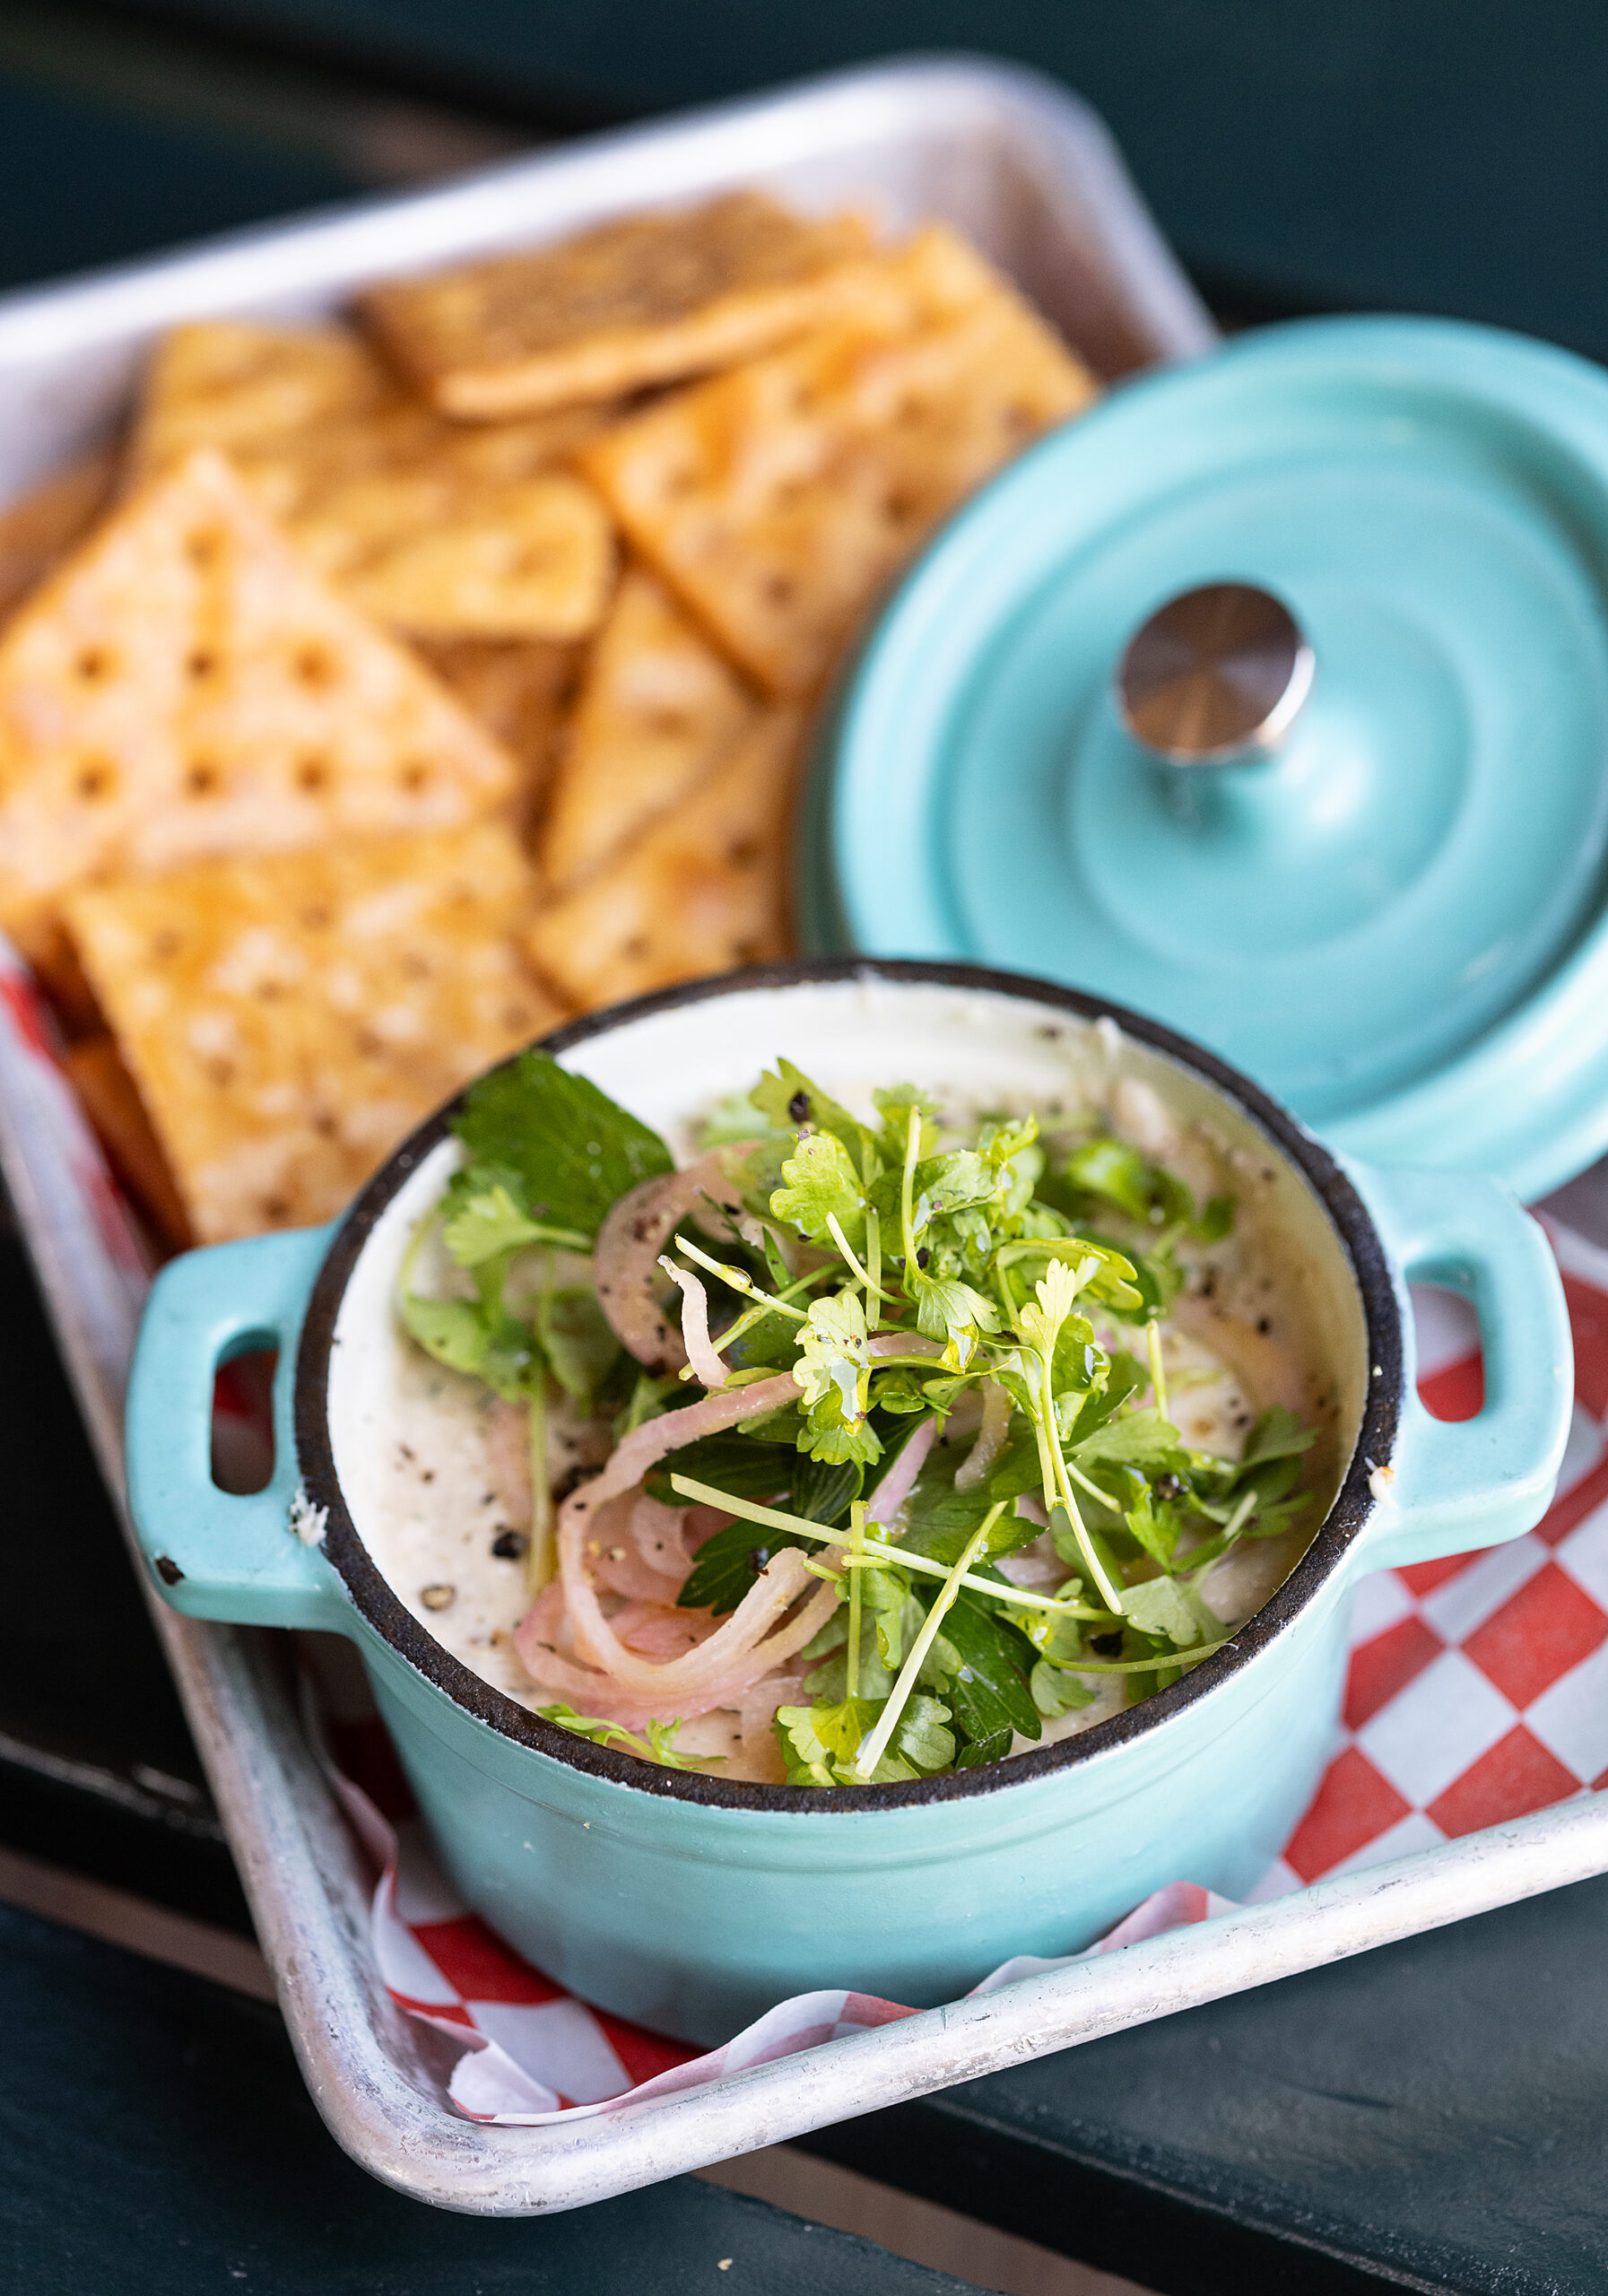 Smoked Black Cod Dip with celery, pickled shallots and fried saltines from Nick’s Cove Restaurant on Tomales Bay Monday, September 18, 2023. (Photo John Burgess/The Press Democrat)